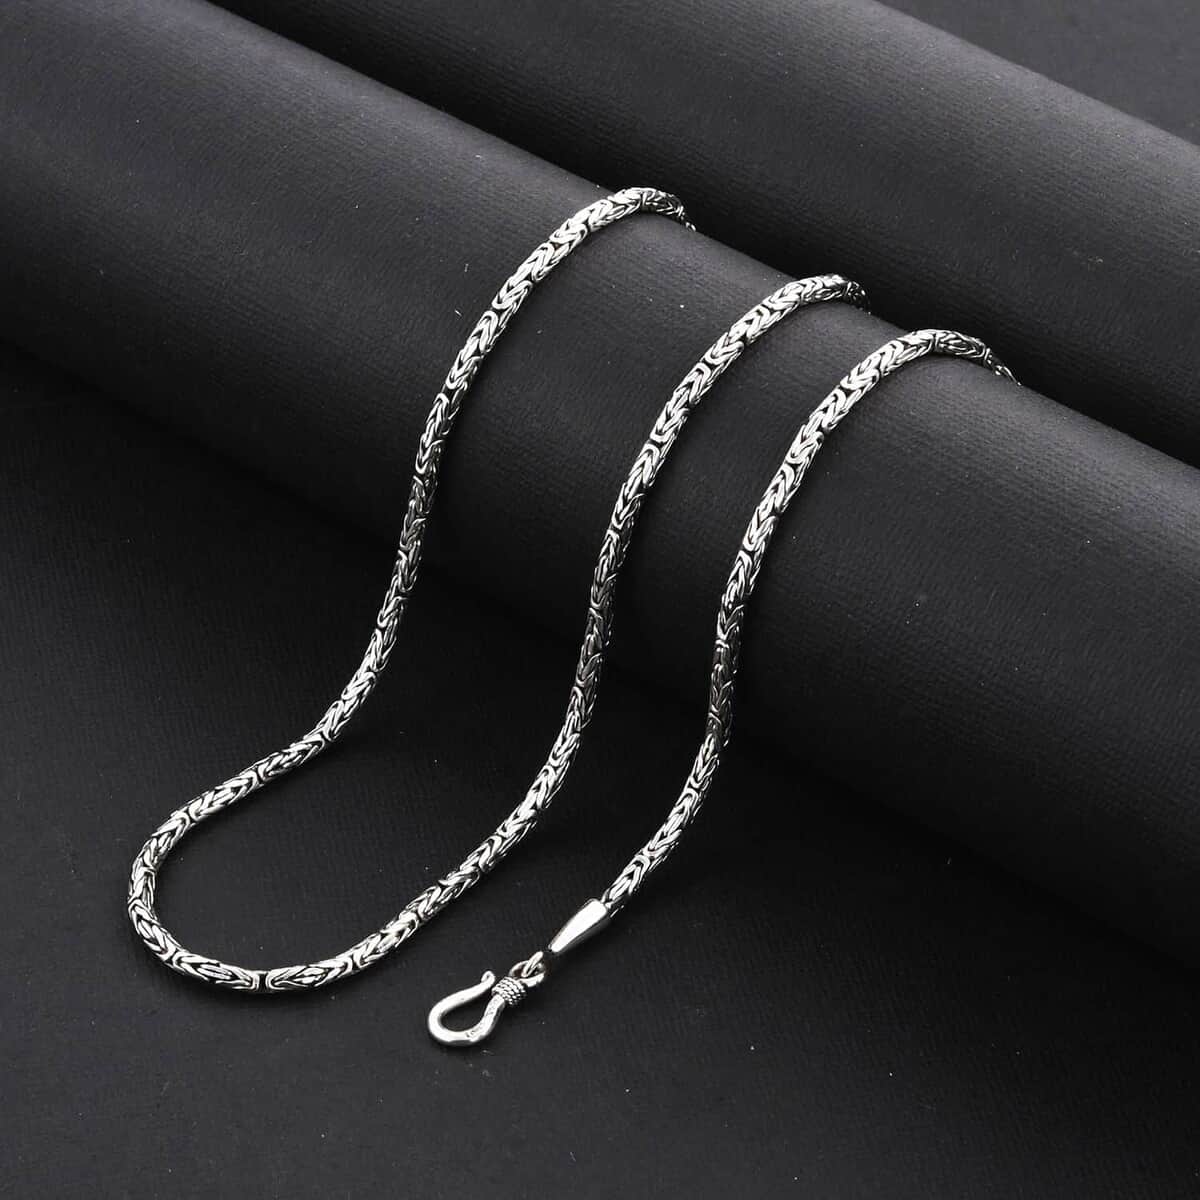 Bali Legacy Sterling Silver Borobudur Chain Necklace, Sterling Silver Necklace, Silver Jewelry, 22 Inch Chain Necklace 2.5mm 22.40 Grams image number 1